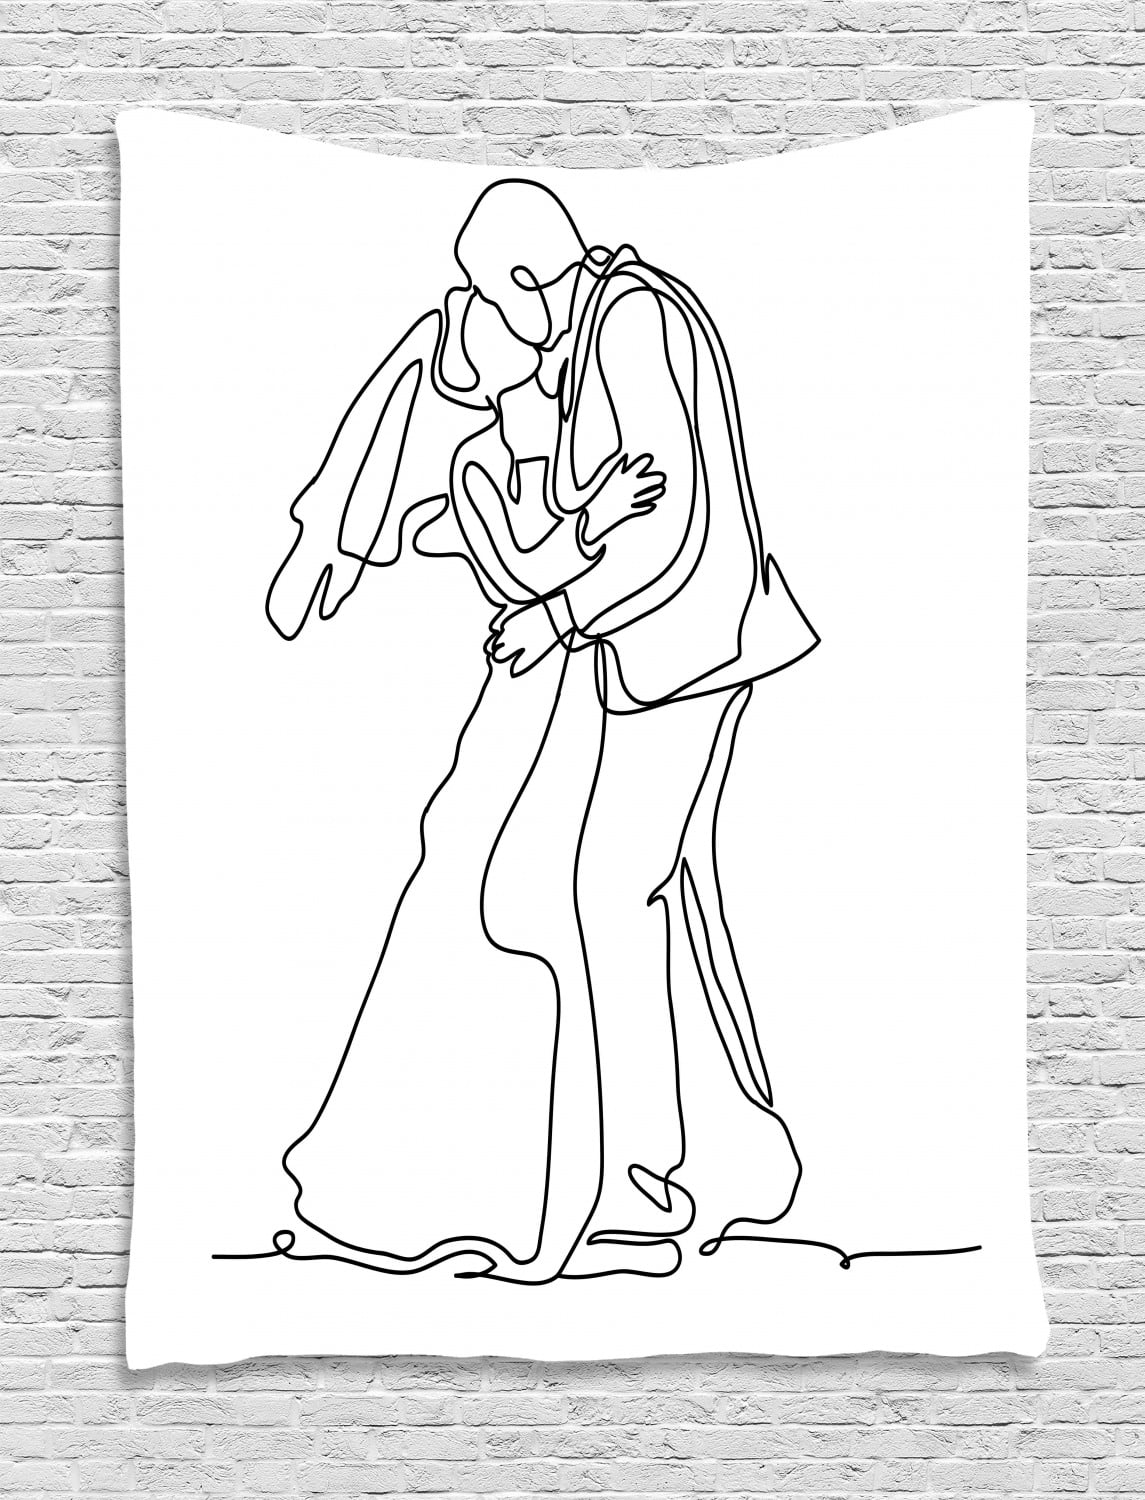 Married Couple Drawings for Sale - Fine Art America